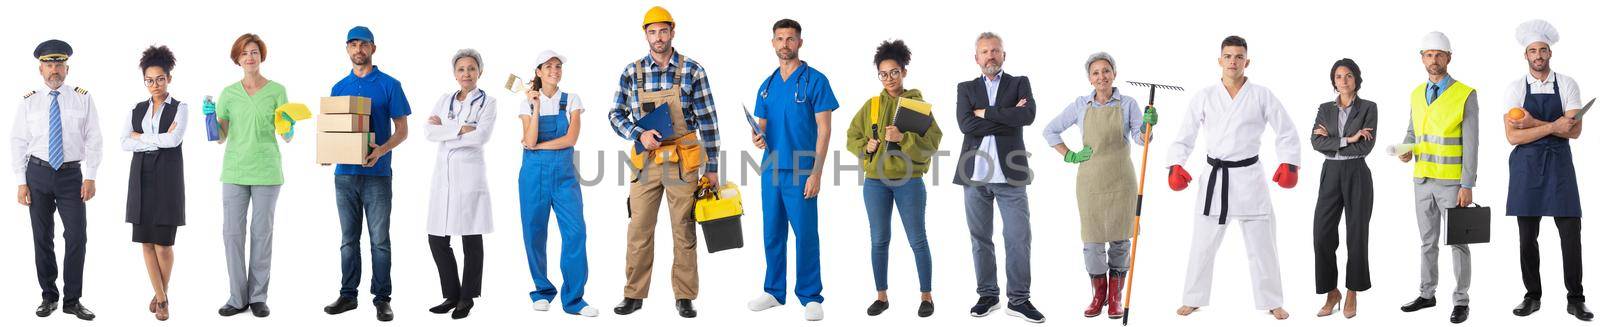 People of diverse professions on white by ALotOfPeople